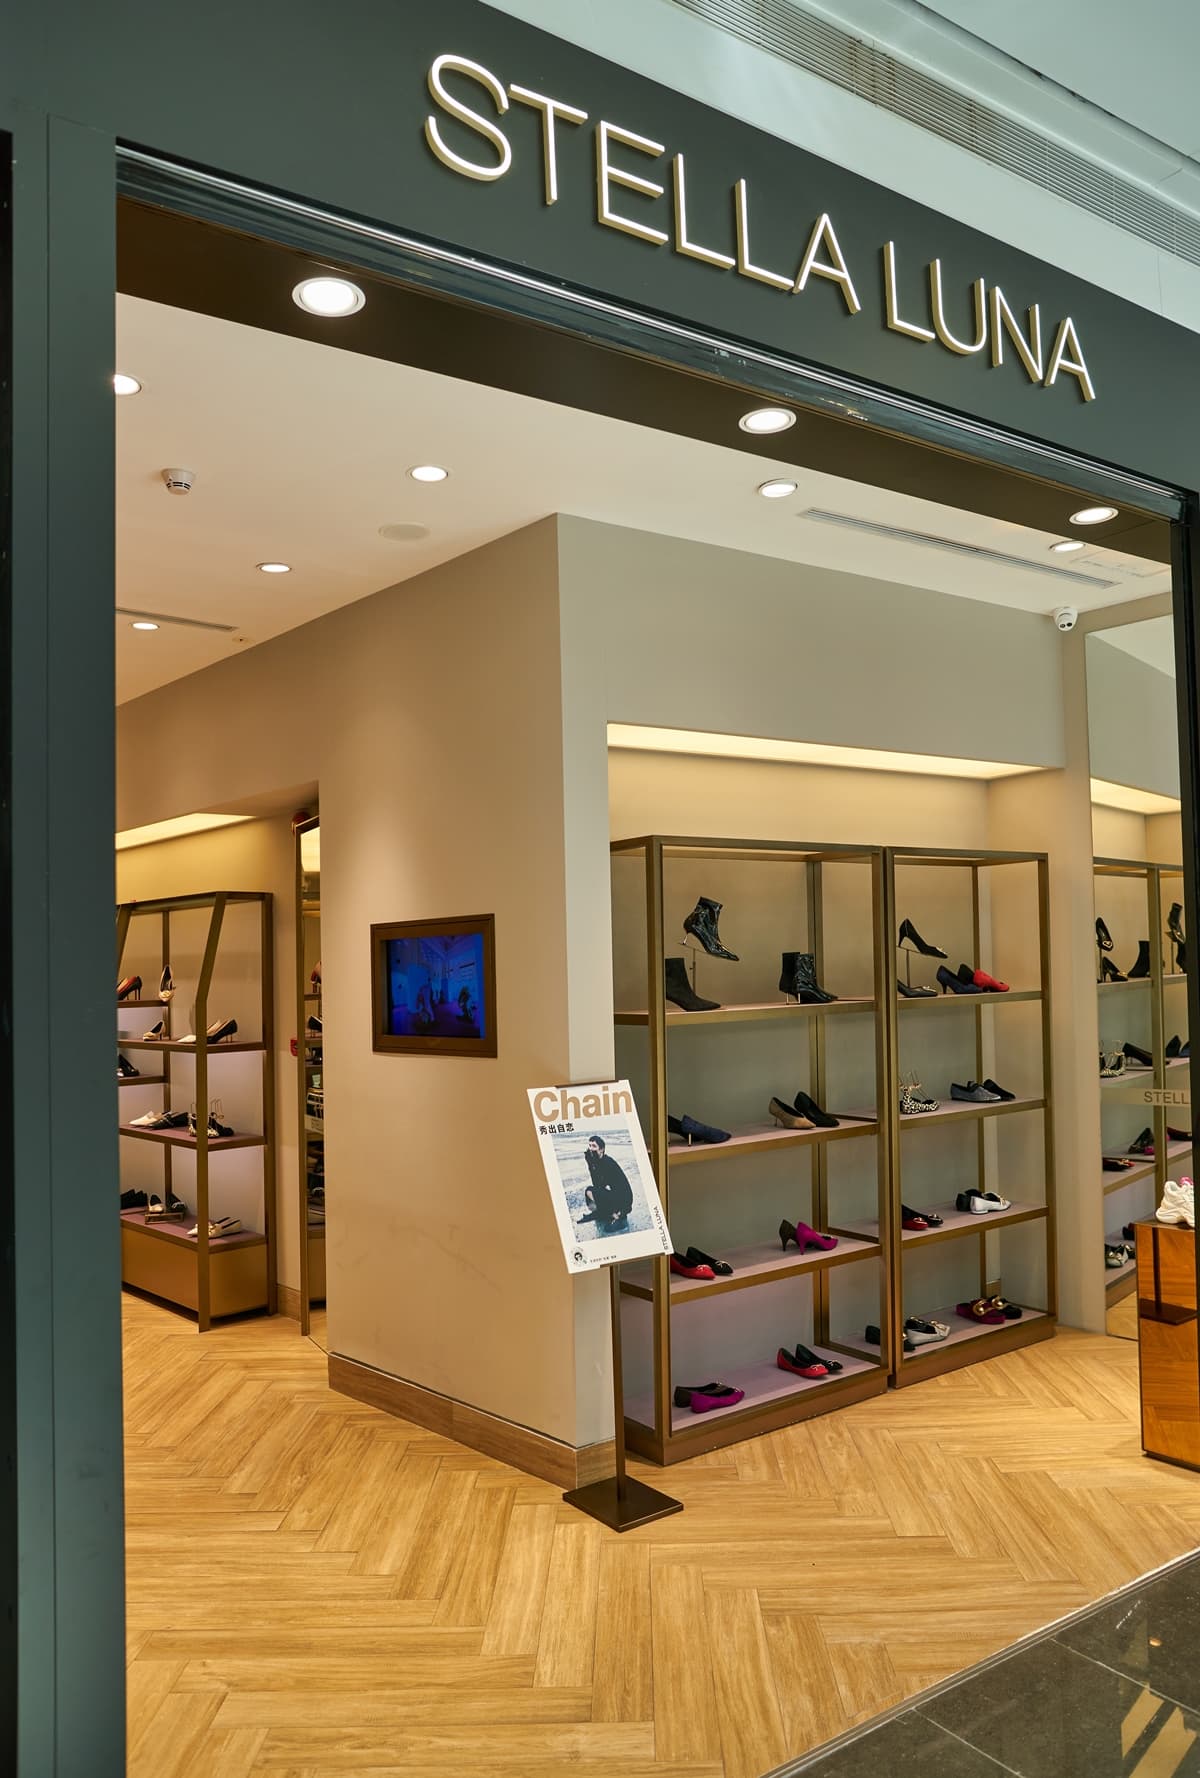 Stella Luna is a luxury shoe brand founded in 2006 by Stephen Chi and is known for its high-quality craftsmanship, use of Italian leather, and designs that are both stylish and comfortable for the modern woman